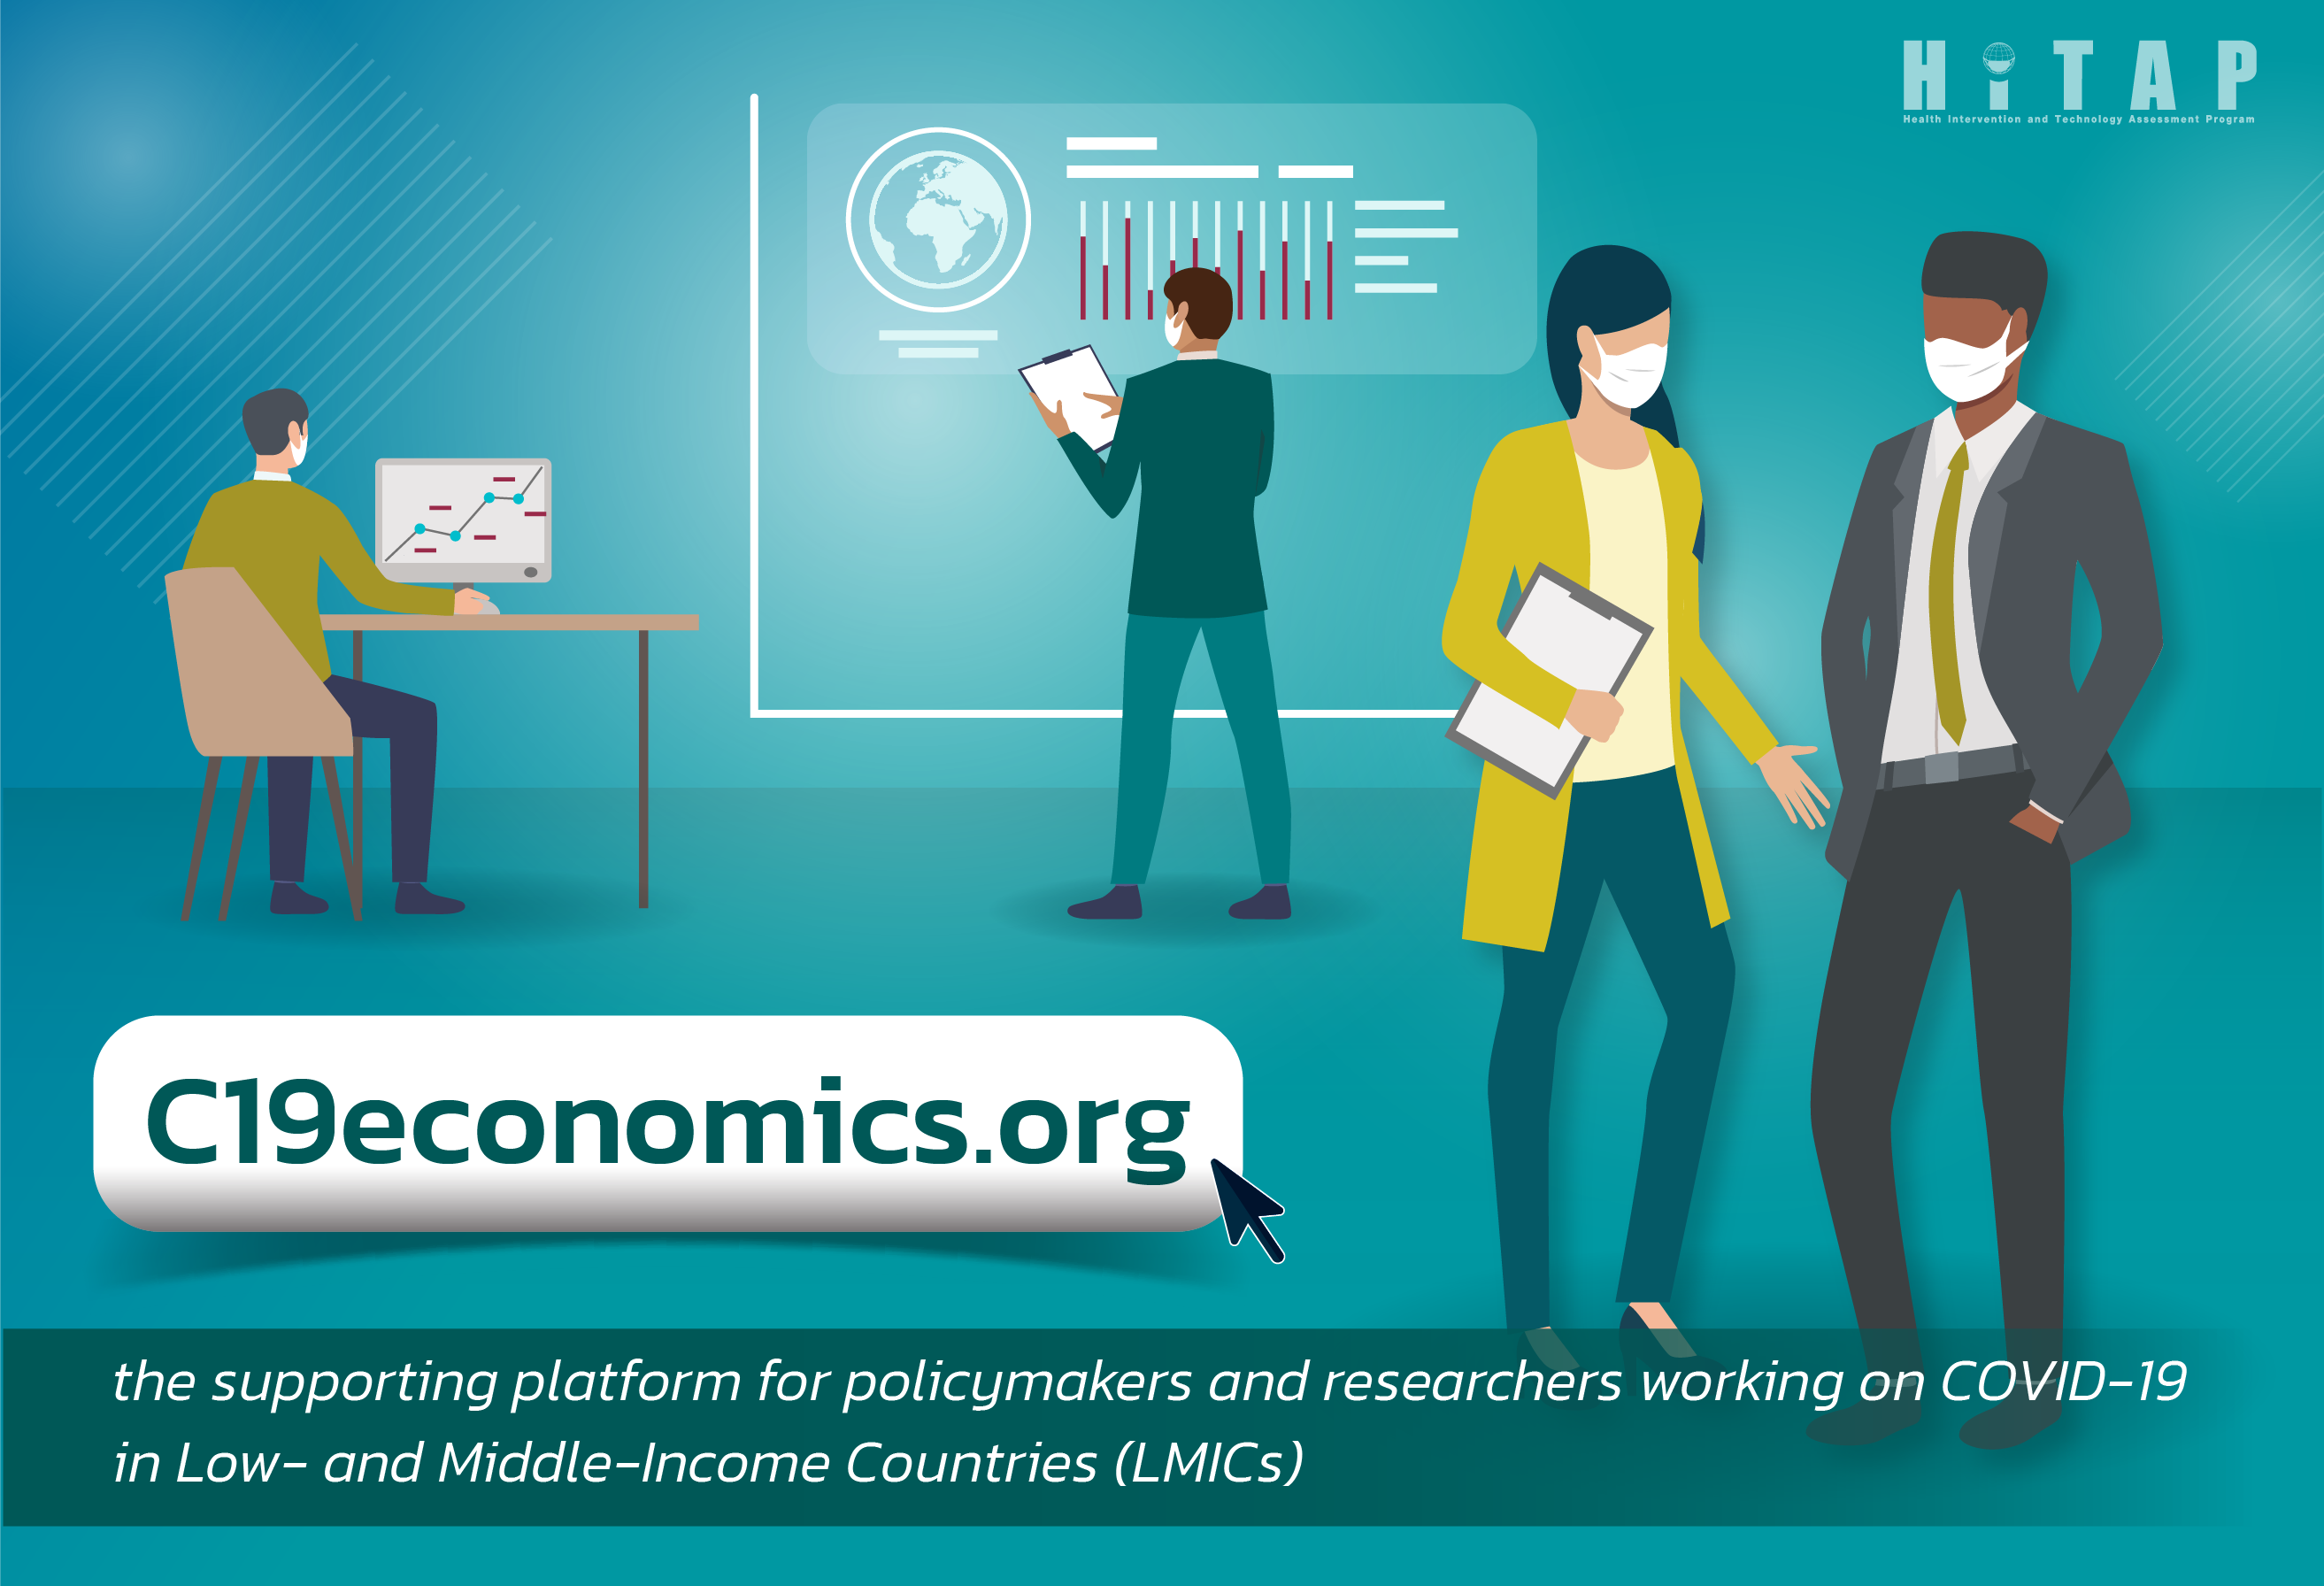 C19economics.org, the supporting platform for policymakers and researchers working on COVID-19 in Low- and Middle-Income Countries (LMICs)